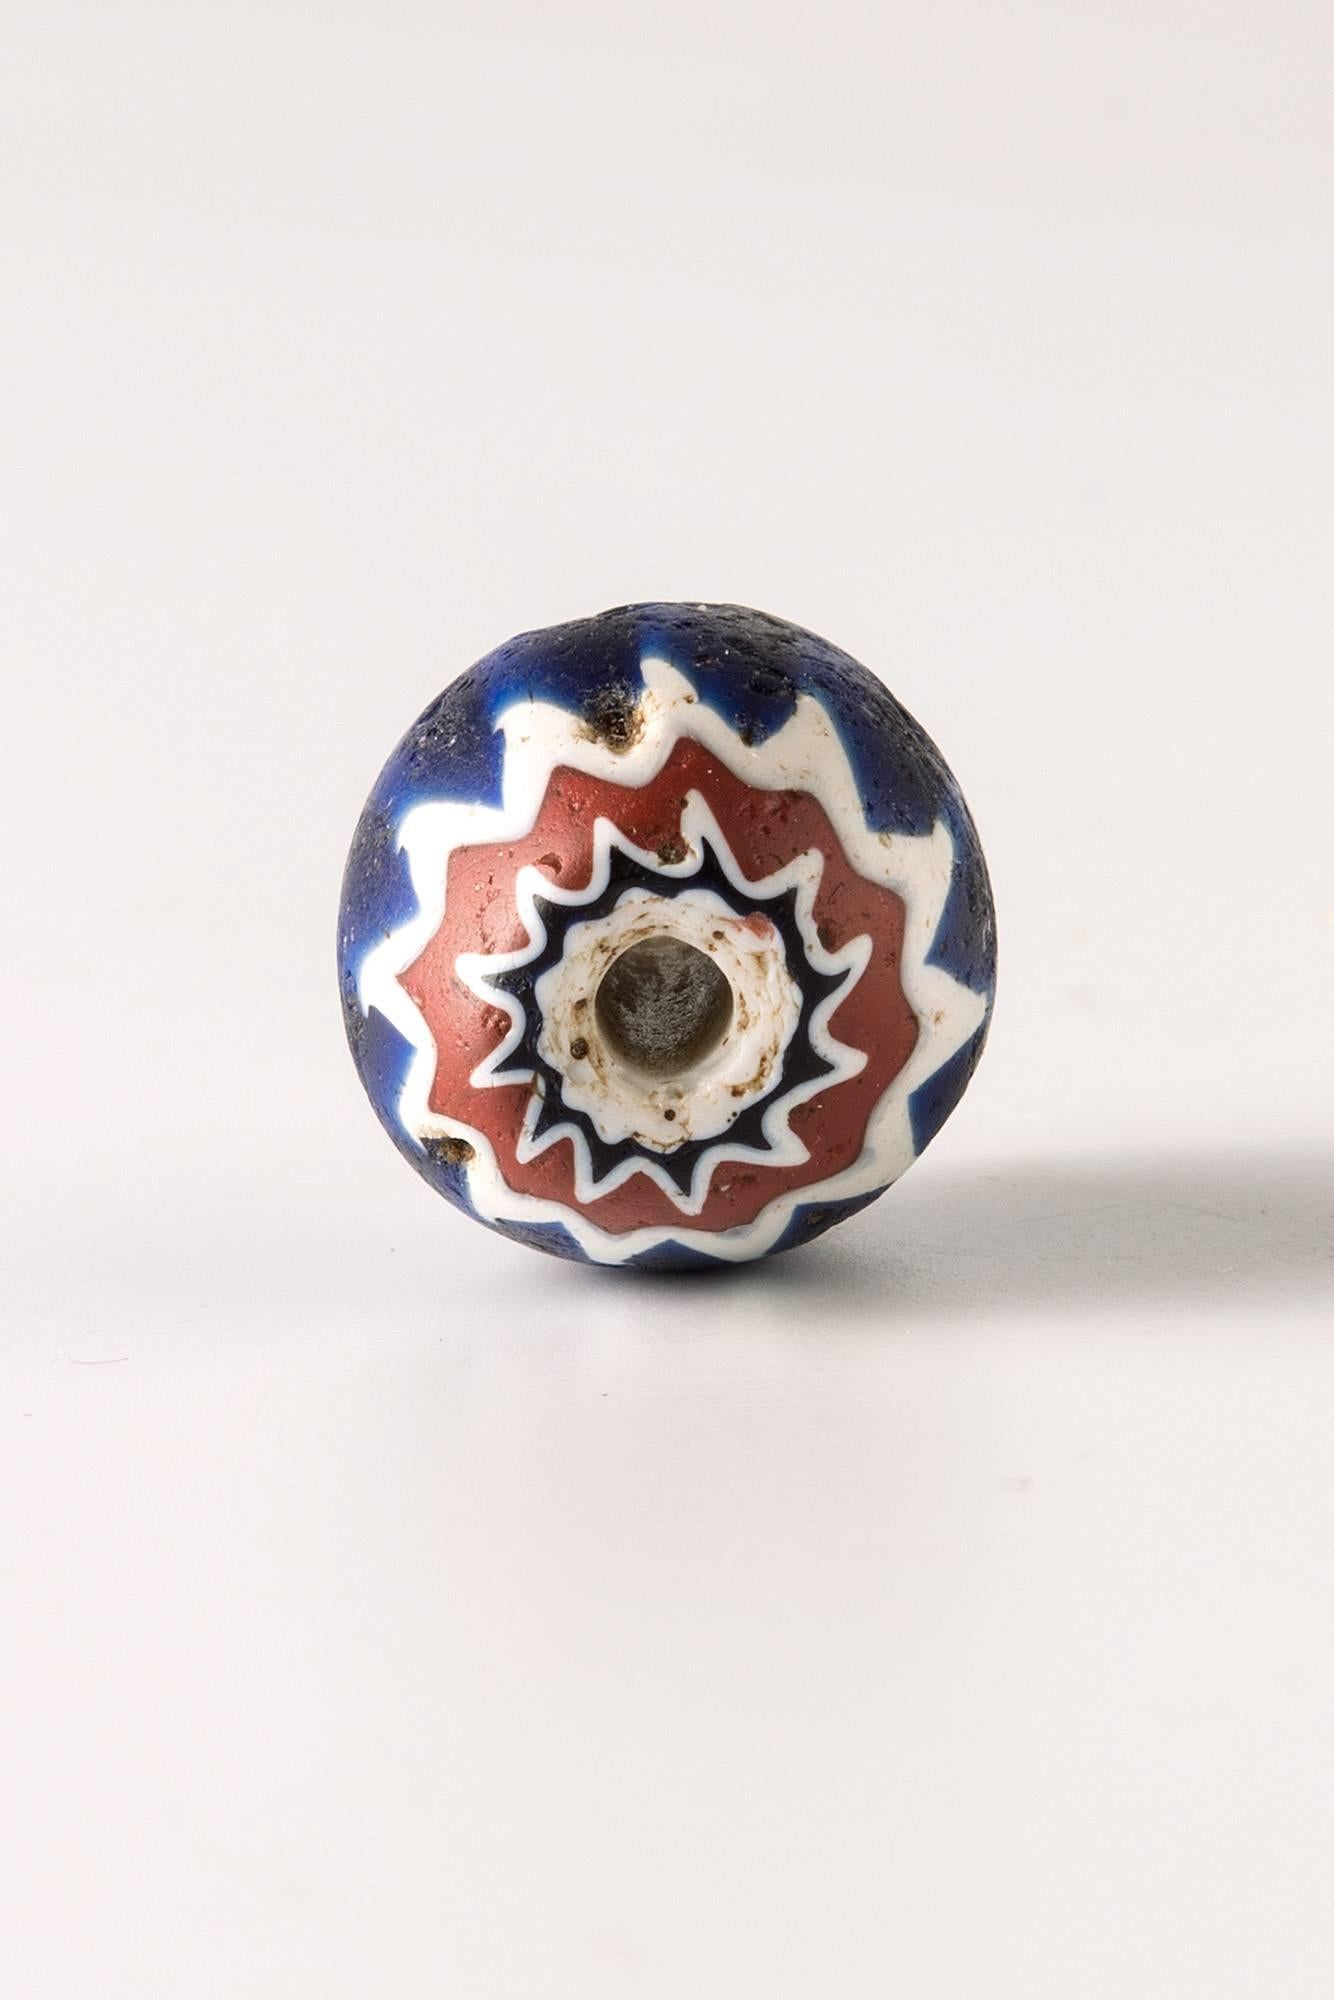 Beautiful large six layered multicoloured “Rosetta” Chevron bead, in cobalt blue, red and white in a twelve star pattern.
Venetian, c. 16th-17th century
In excellent condition.
Provenance: Private Swiss collection since 1970.	
Accompanied by a